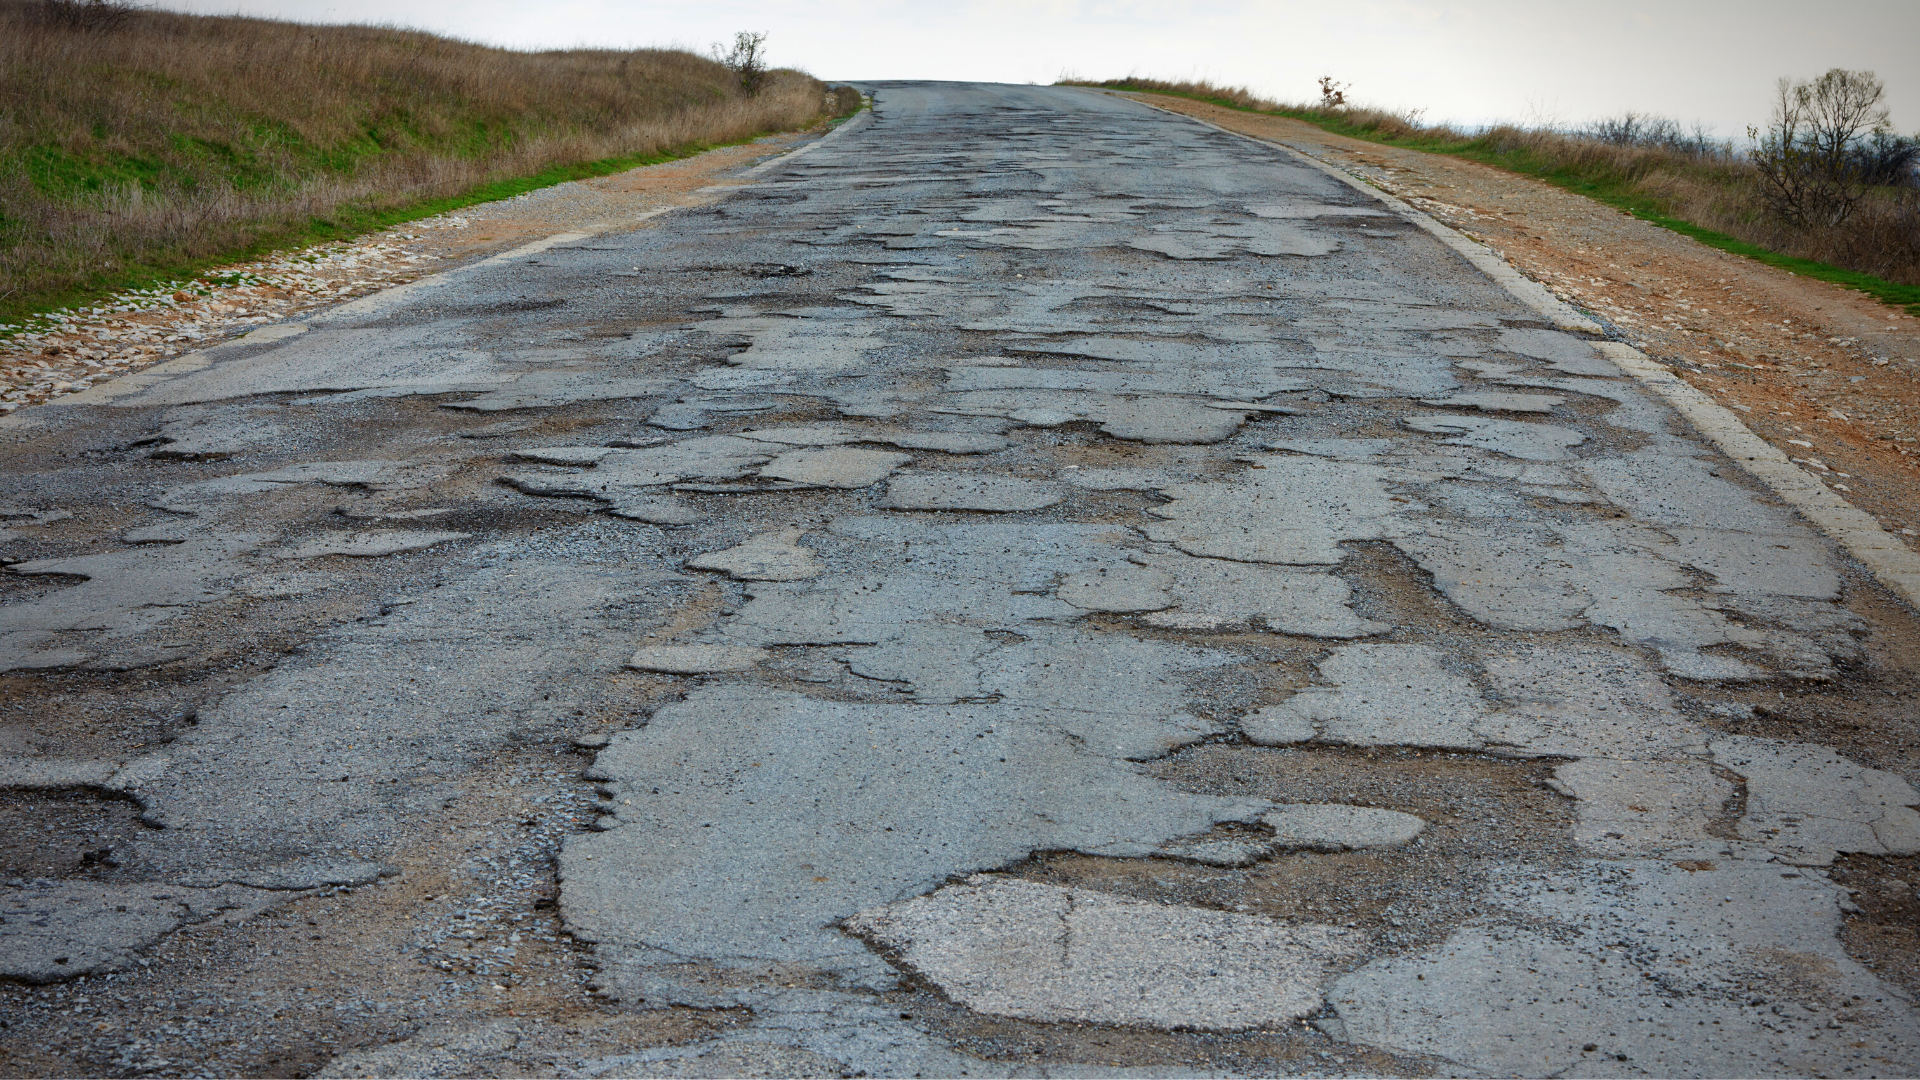 Damage to The Tarred Road